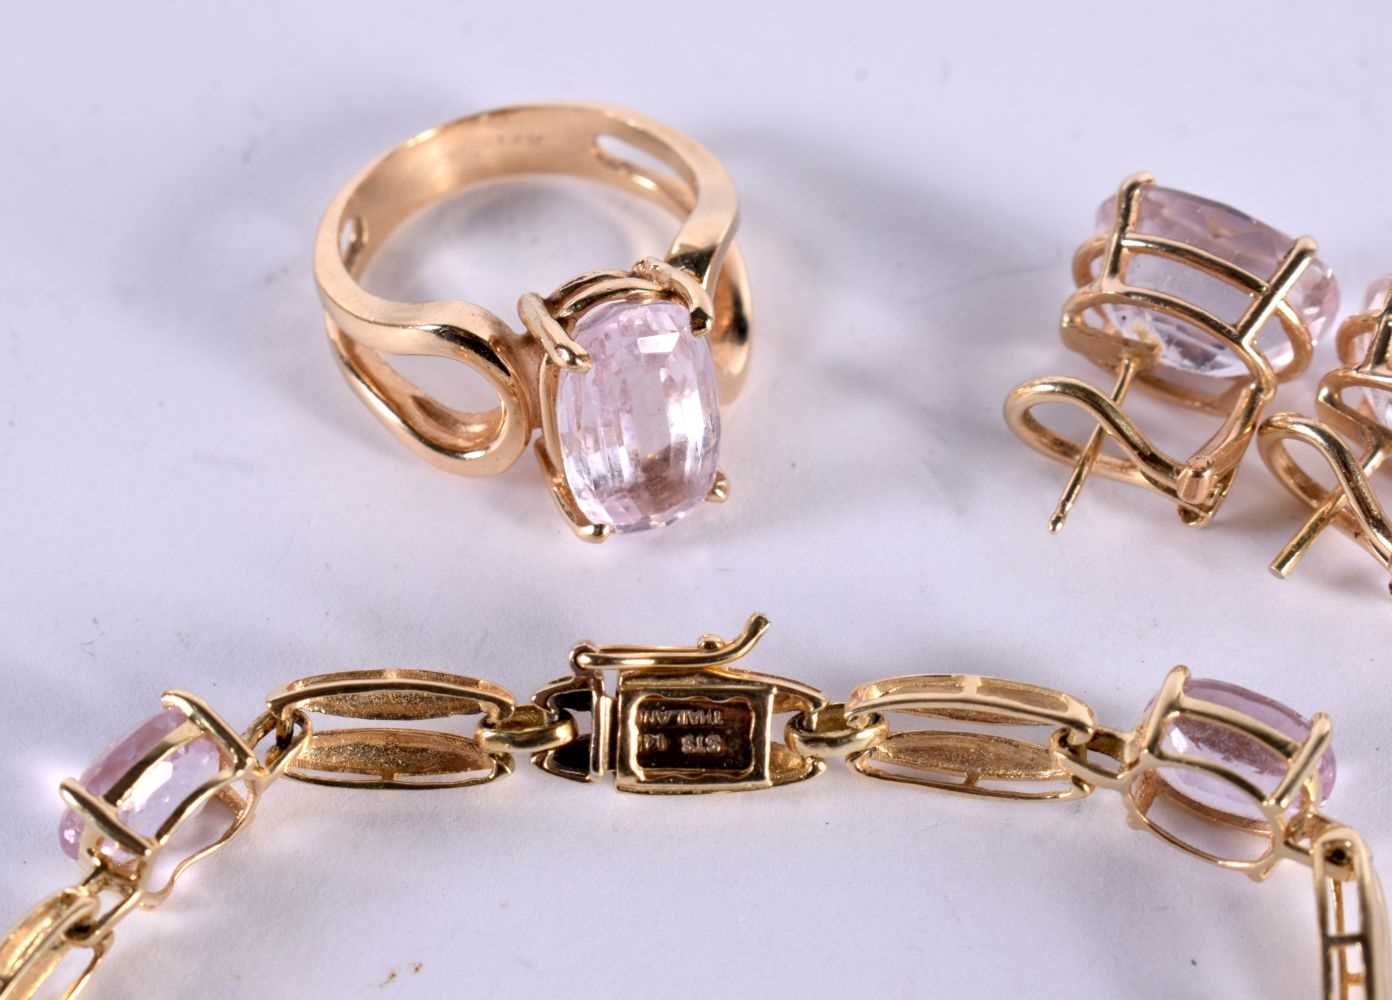 A 14CT GOLD AND GEM SET BRACELET, RING AND EARRINGS. Stamped 14K, Ring Size Q, Bracelet 19 cm - Image 4 of 4